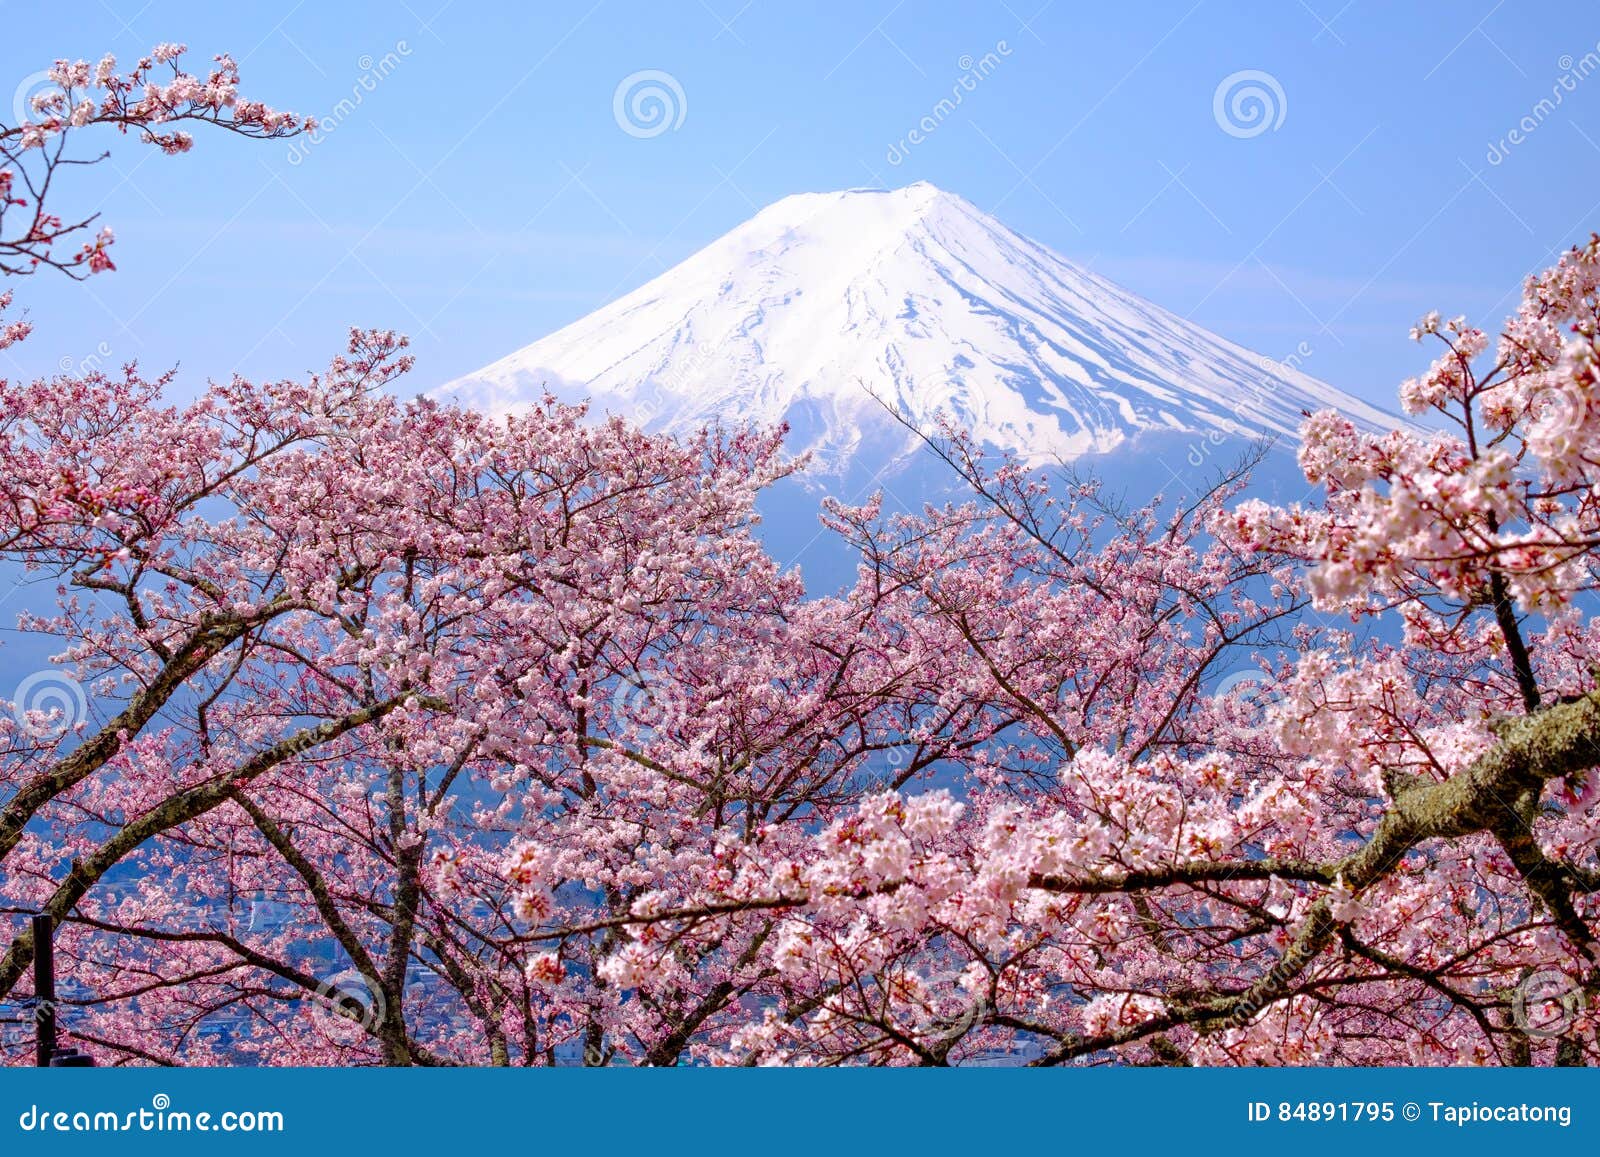 mt fuji and cherry blossom in japan spring season & x28;japanese cal